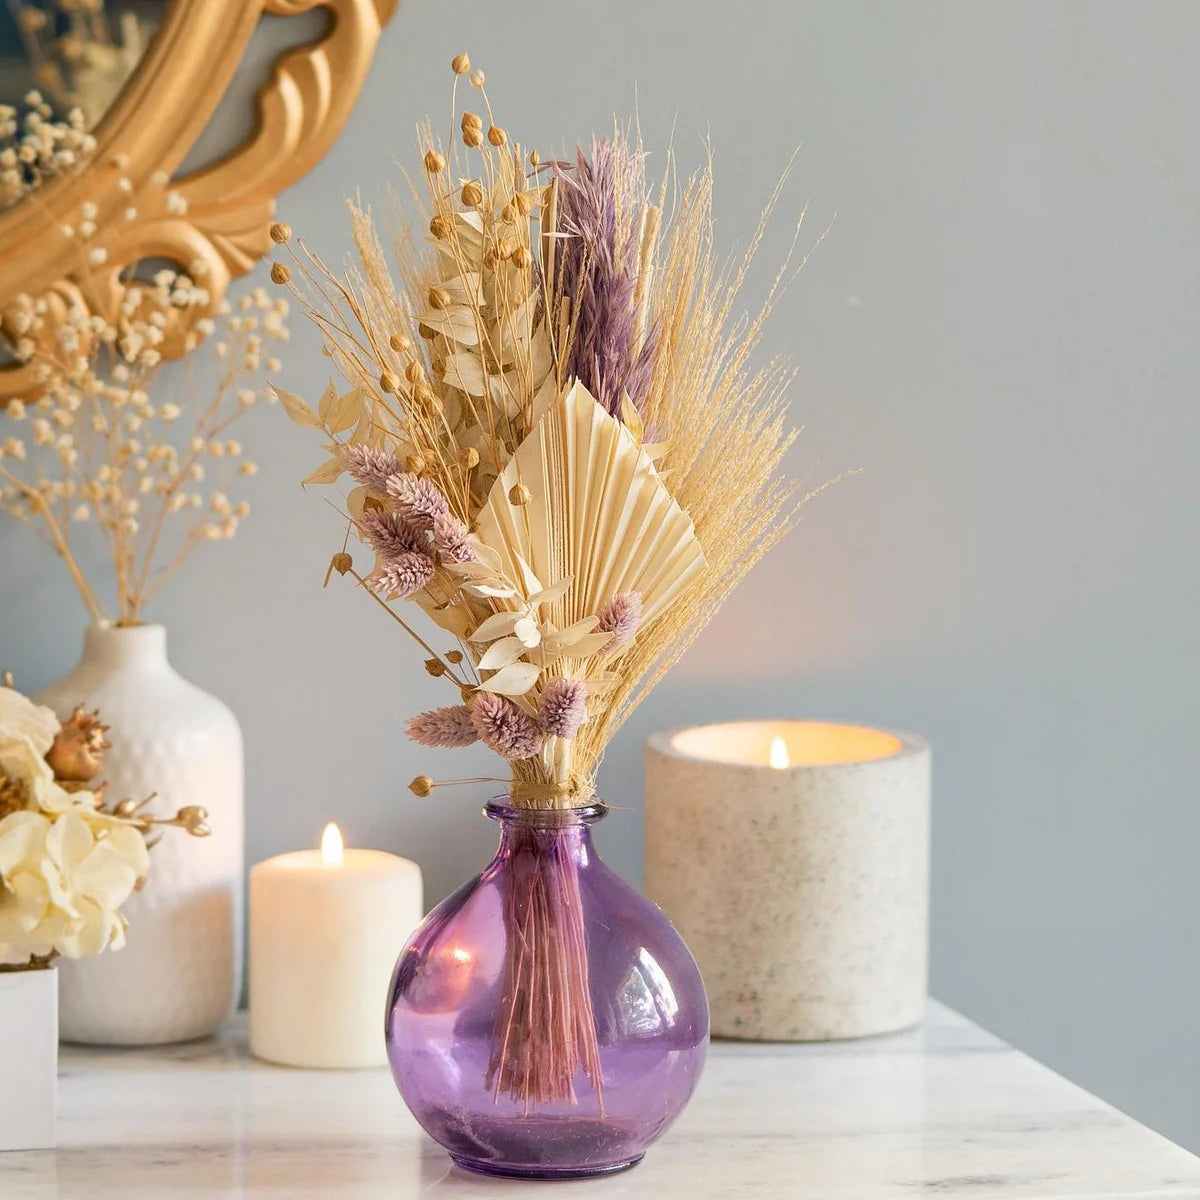 5 Unique Ways to Use Handmade Dried Flowers in Monsoon Home Decor